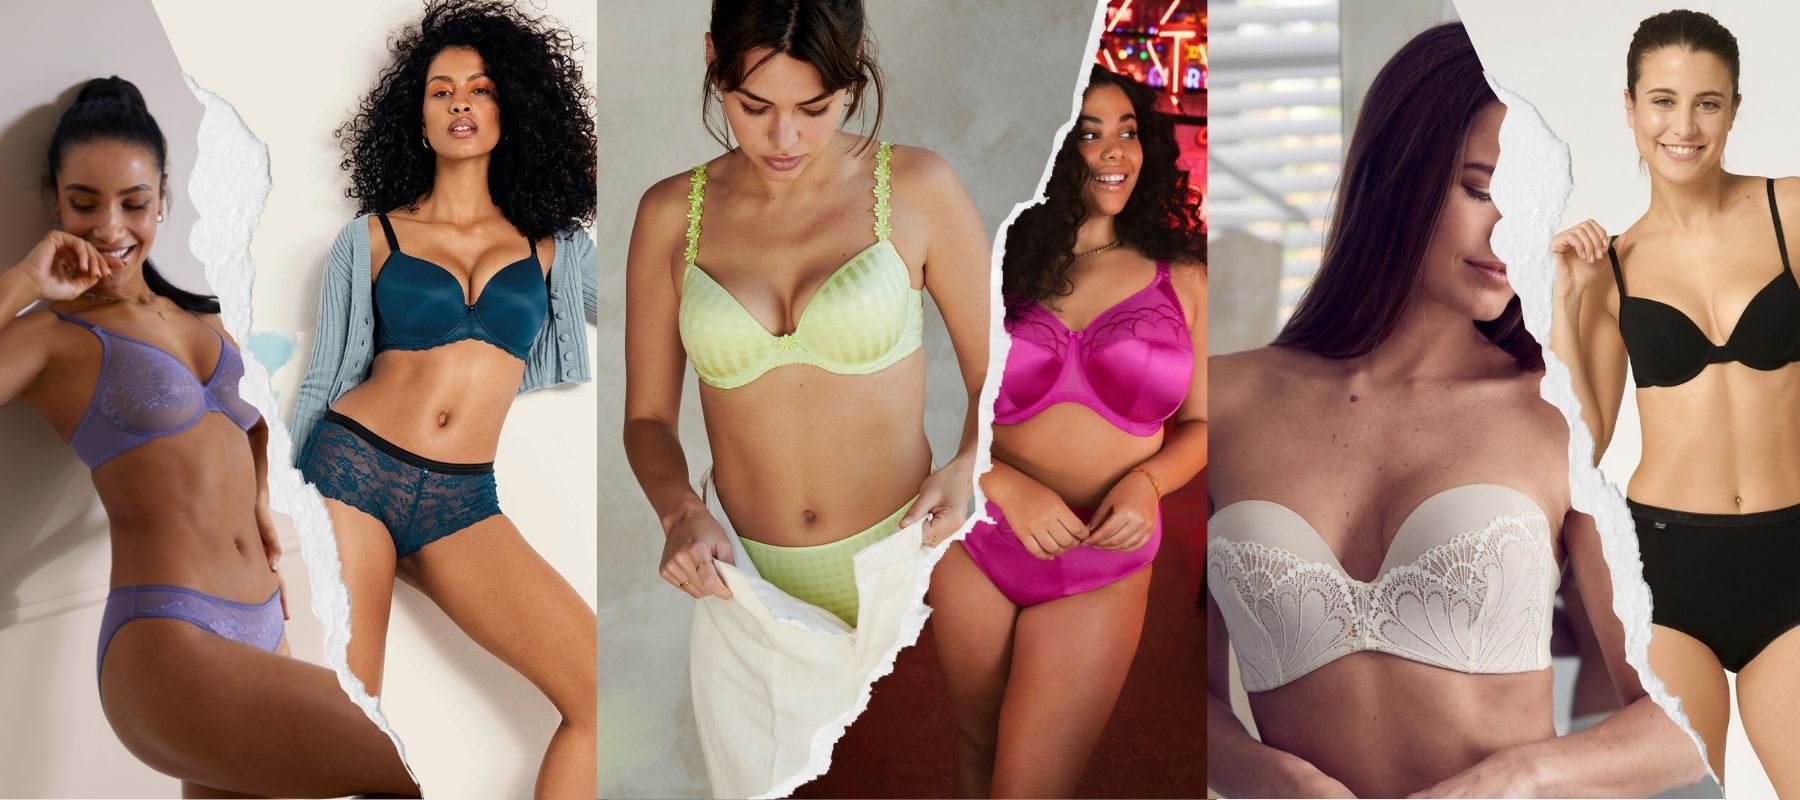 Lingerie Brand Glossary A-Z: What are the Best Lingerie Brands?